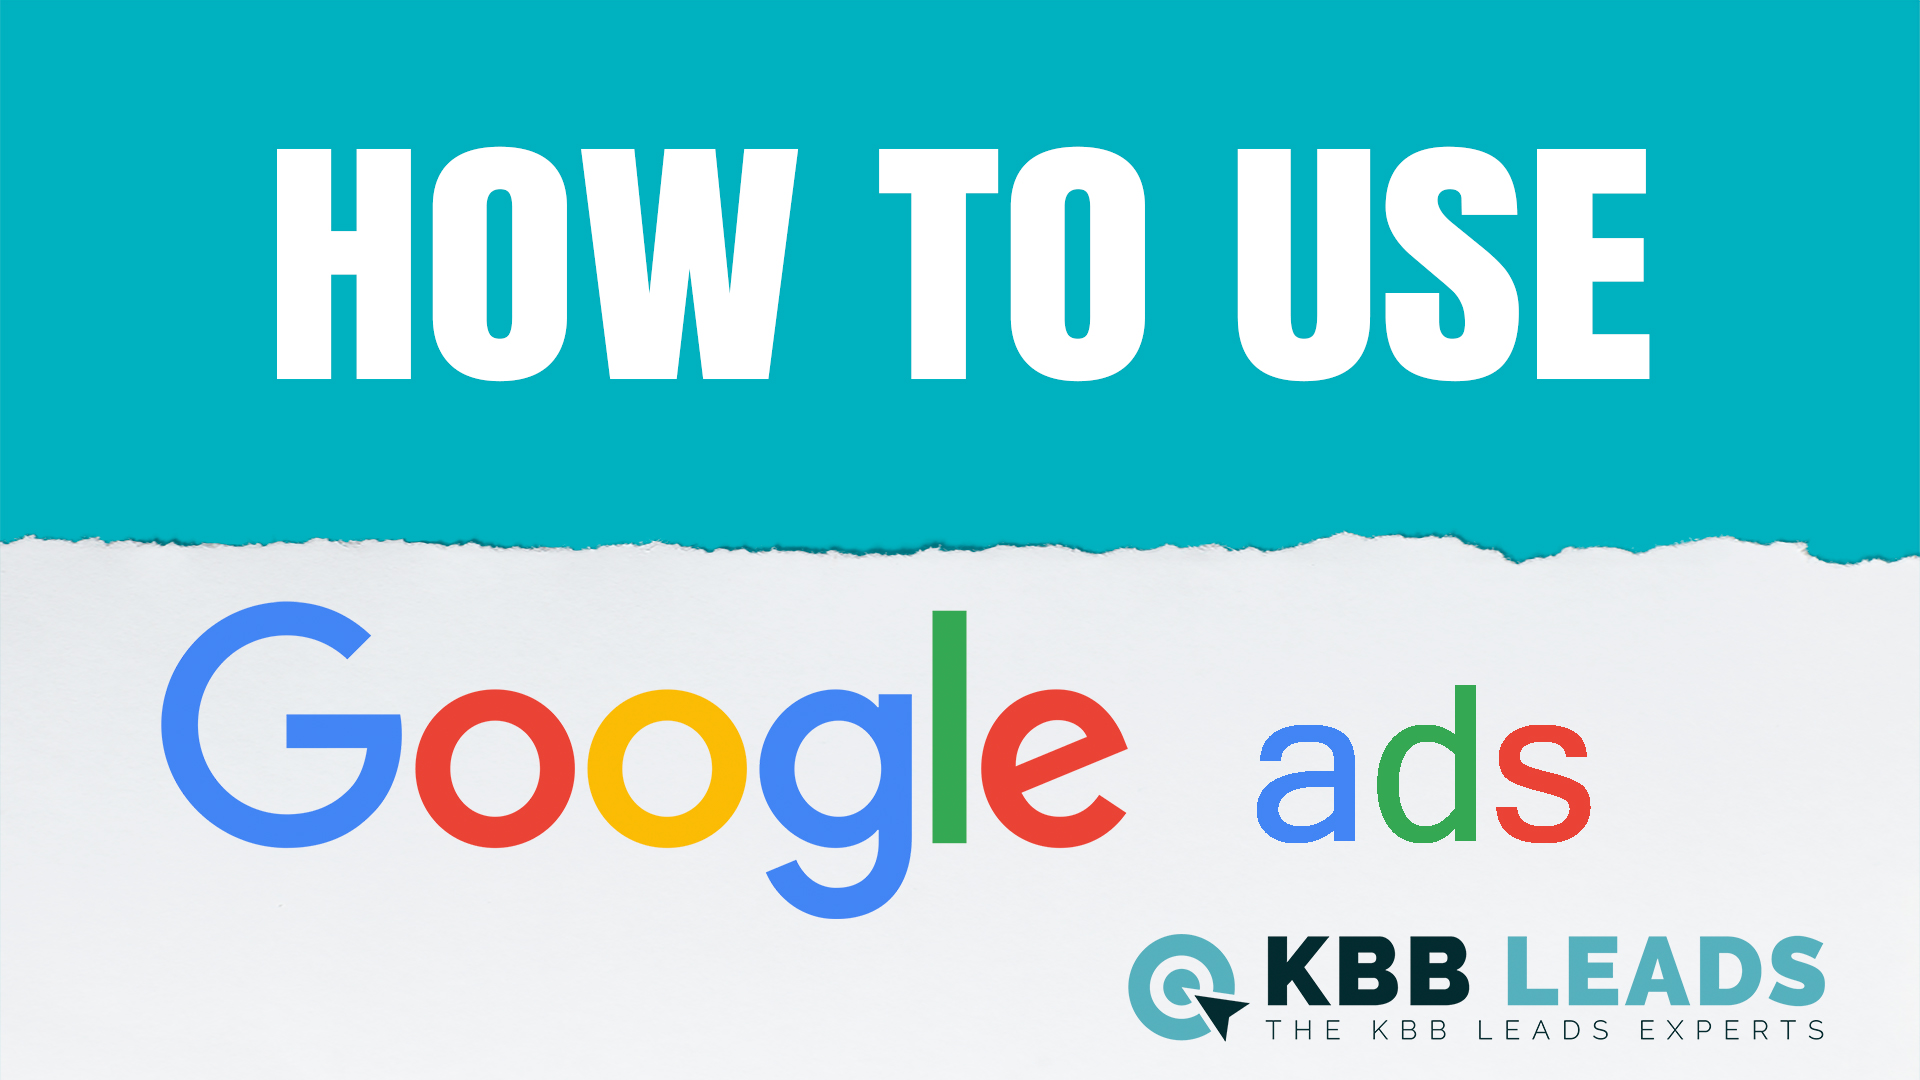 How to use Google Ads to Generate New Leads